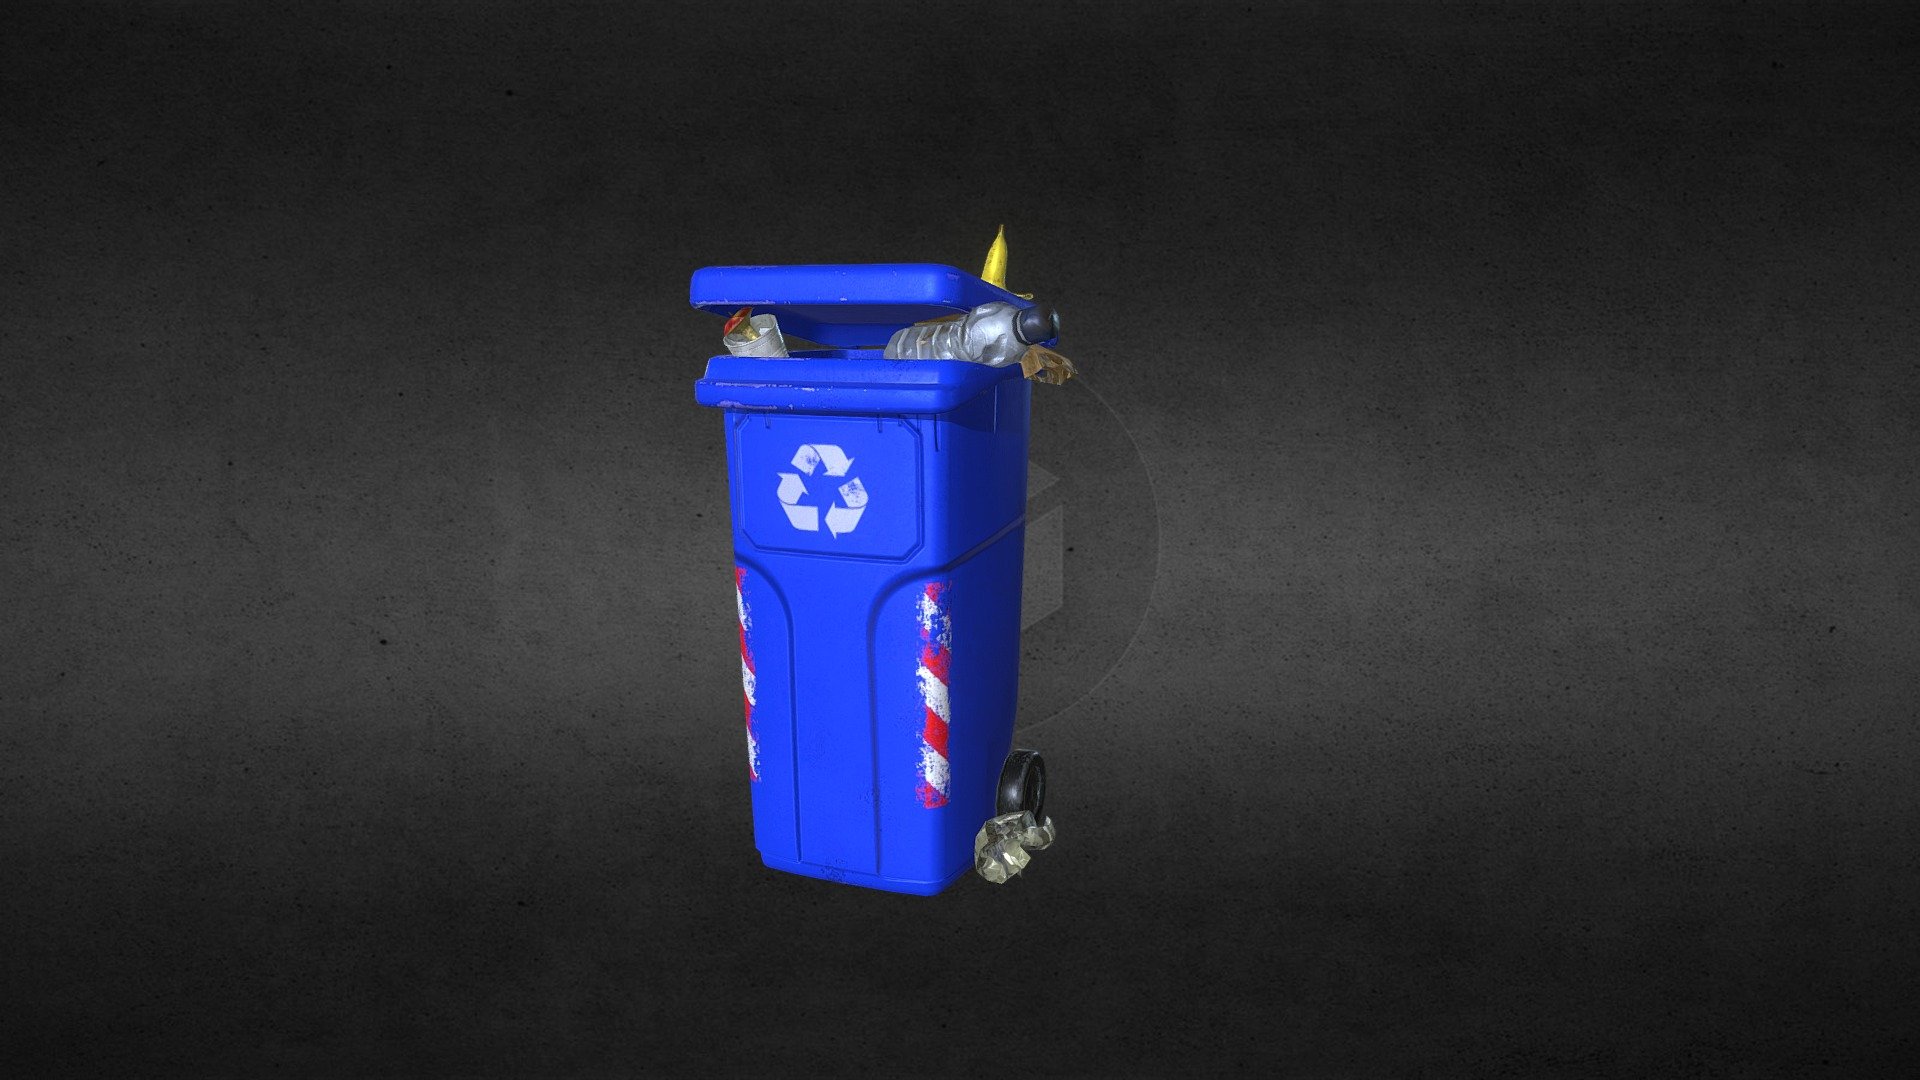 Objects I've created for my AR Instagram game &ldquo;Waste sorting